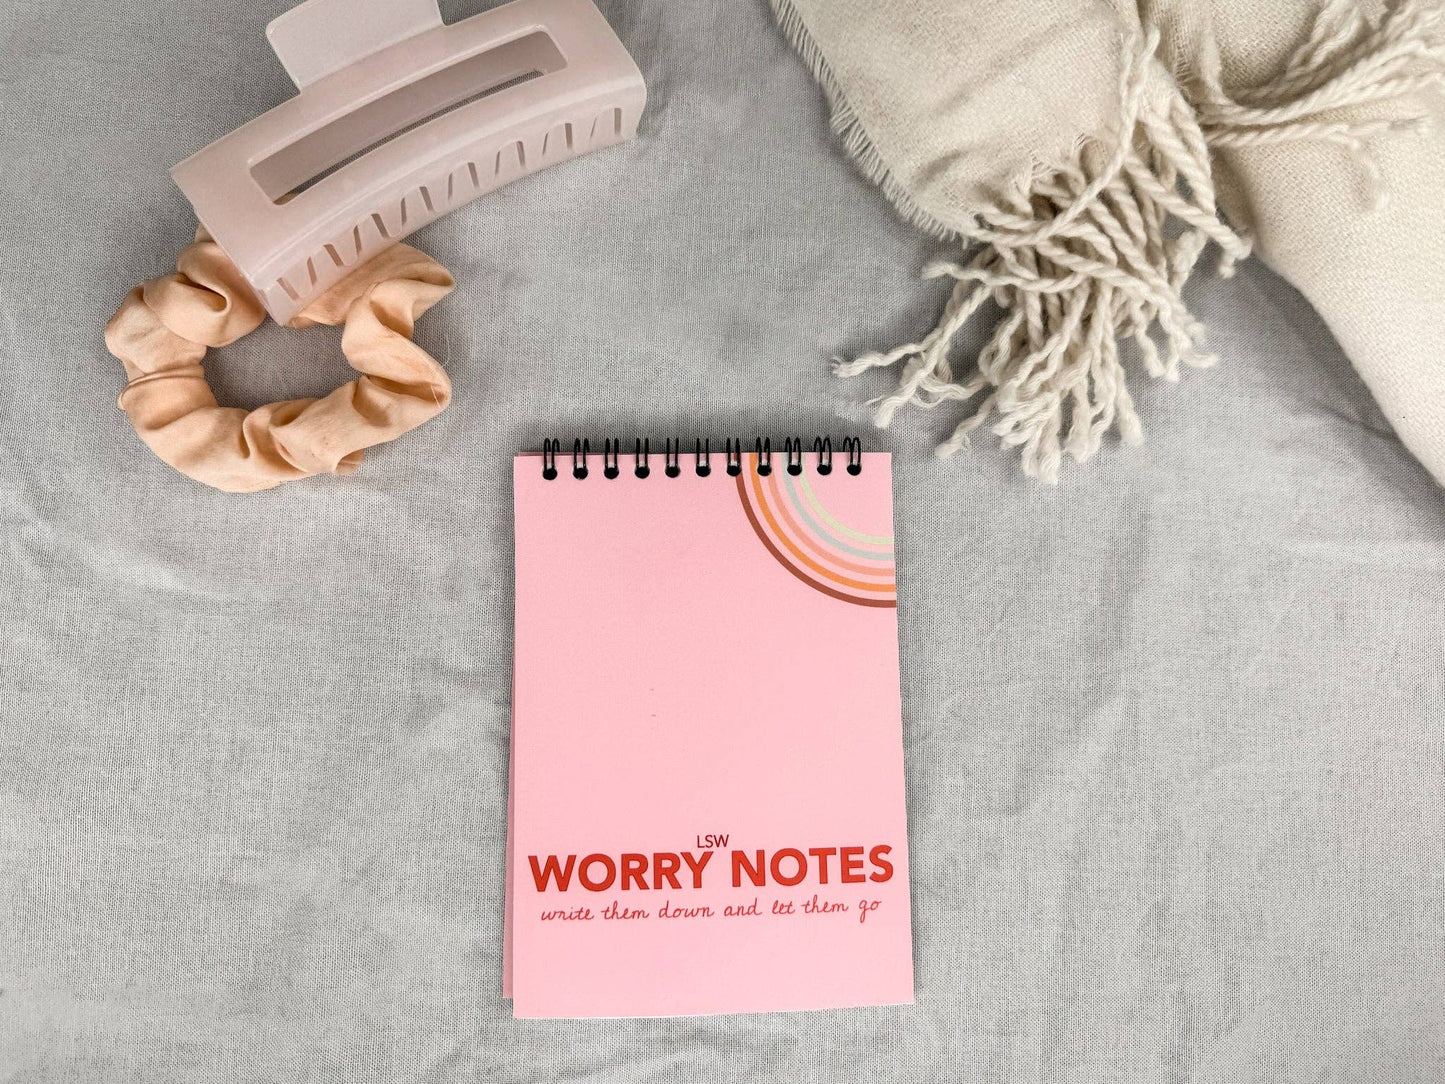 Worry Notes: Notebook for kids' worries, thoughts & feelings